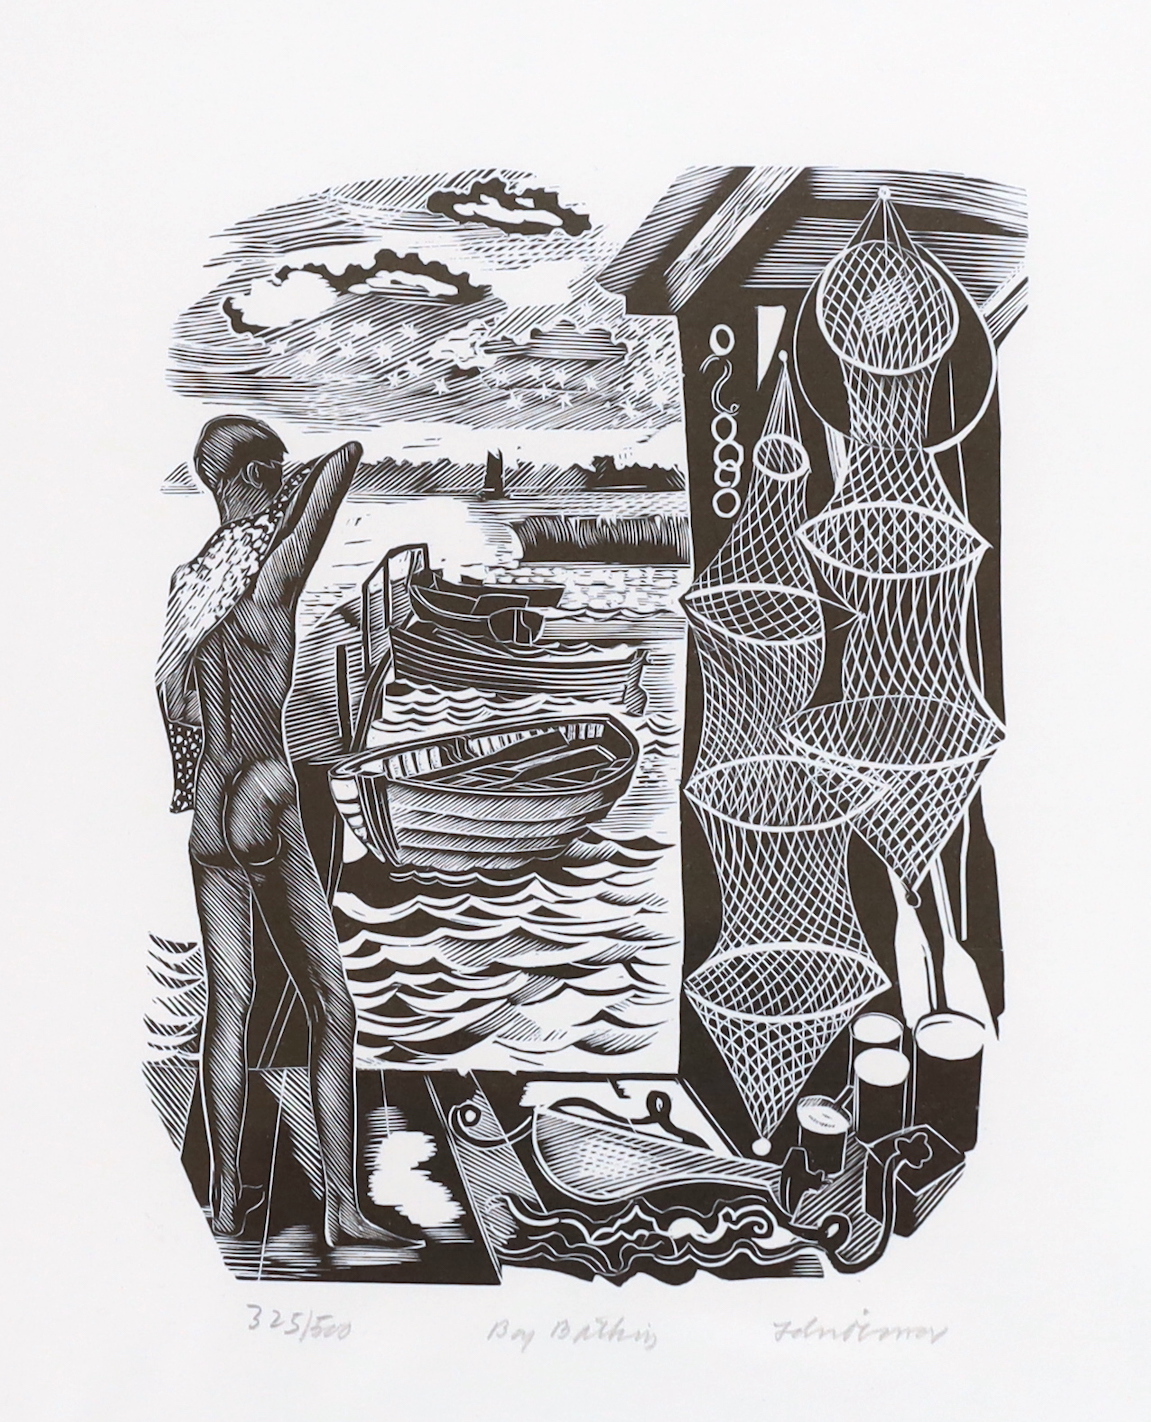 John O'Connor (1913-2004), wood engraving, Boy bathing, signed in pencil, limited edition 325/500,